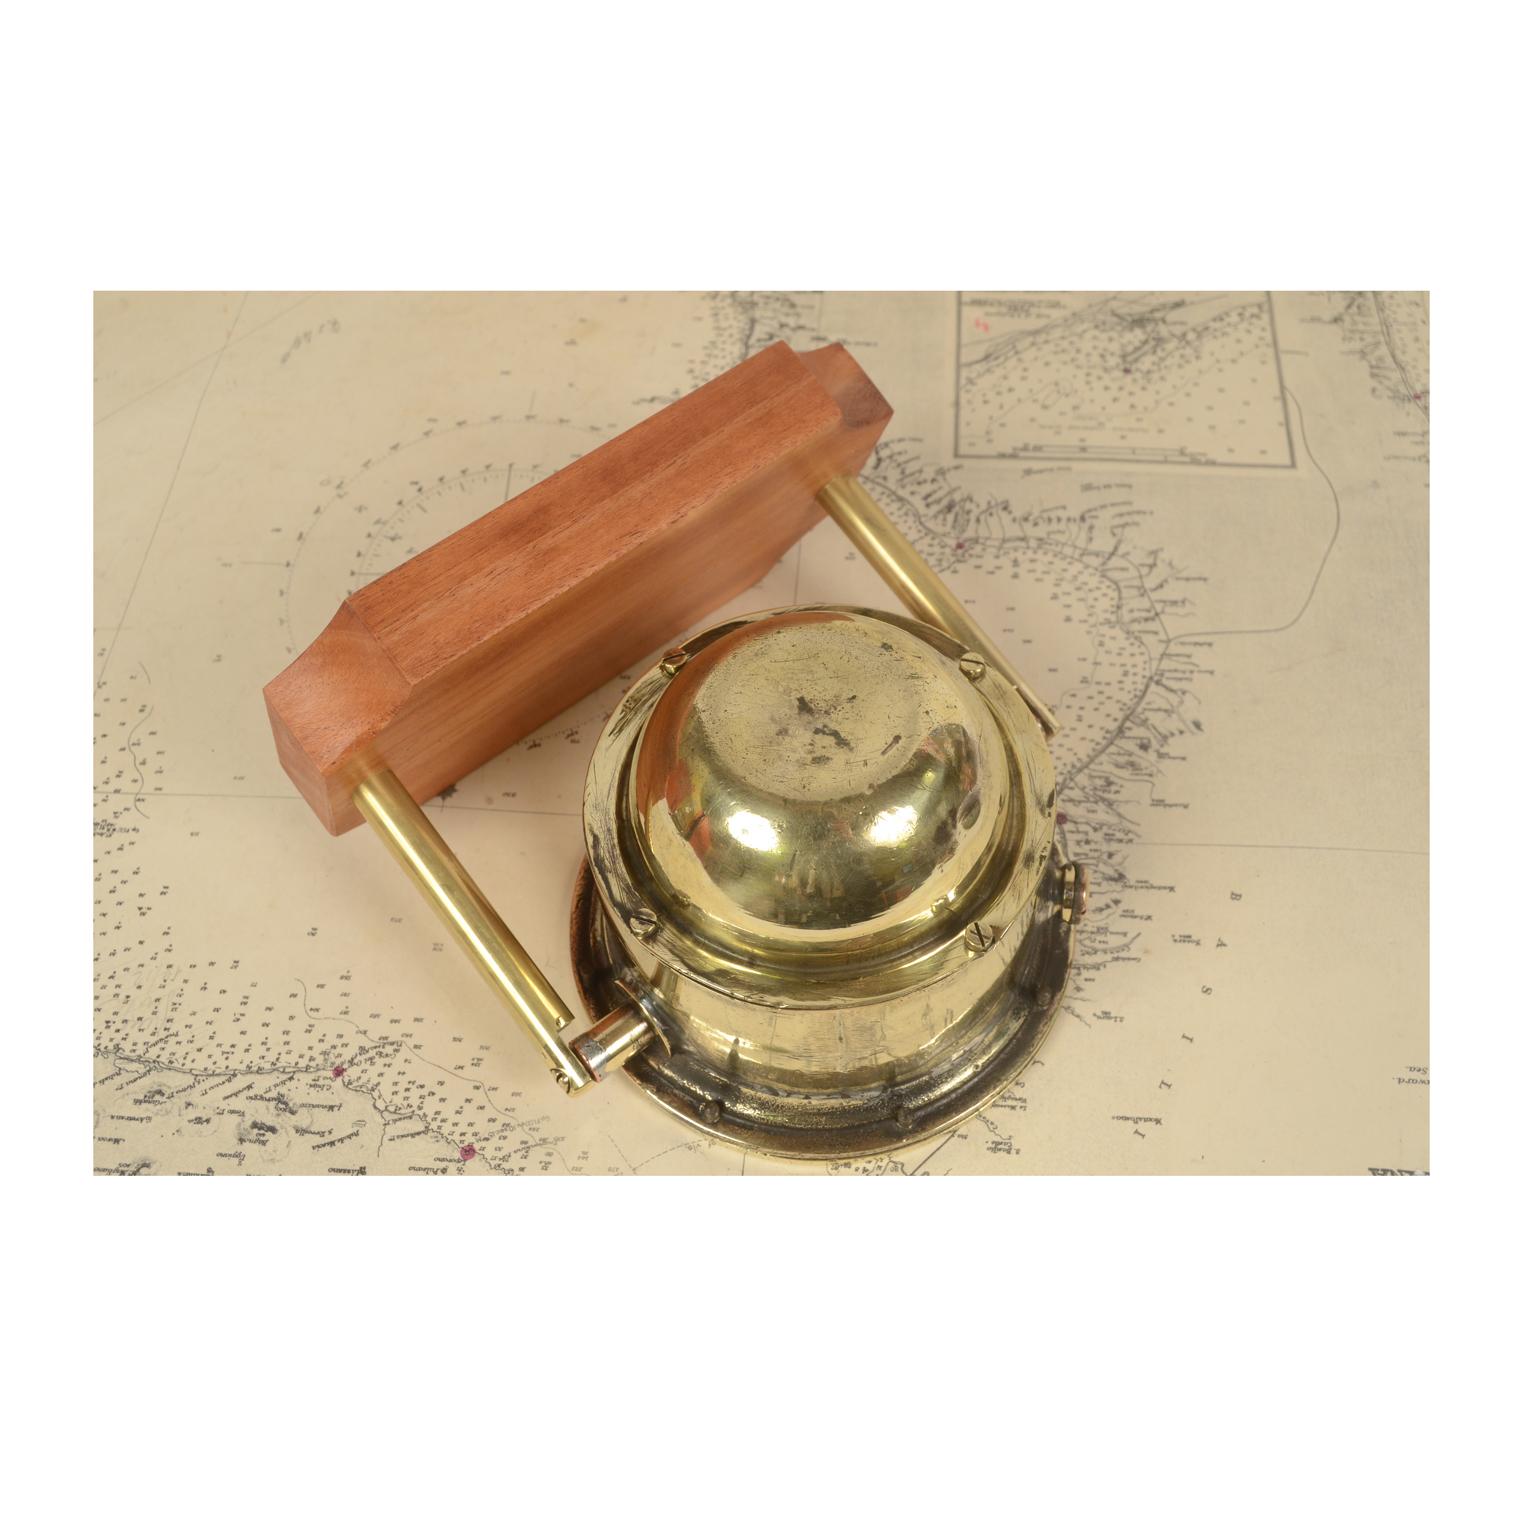 End 19th Century  Antique Brass Nautical Magnetic Compass on a Mahogany Board 4